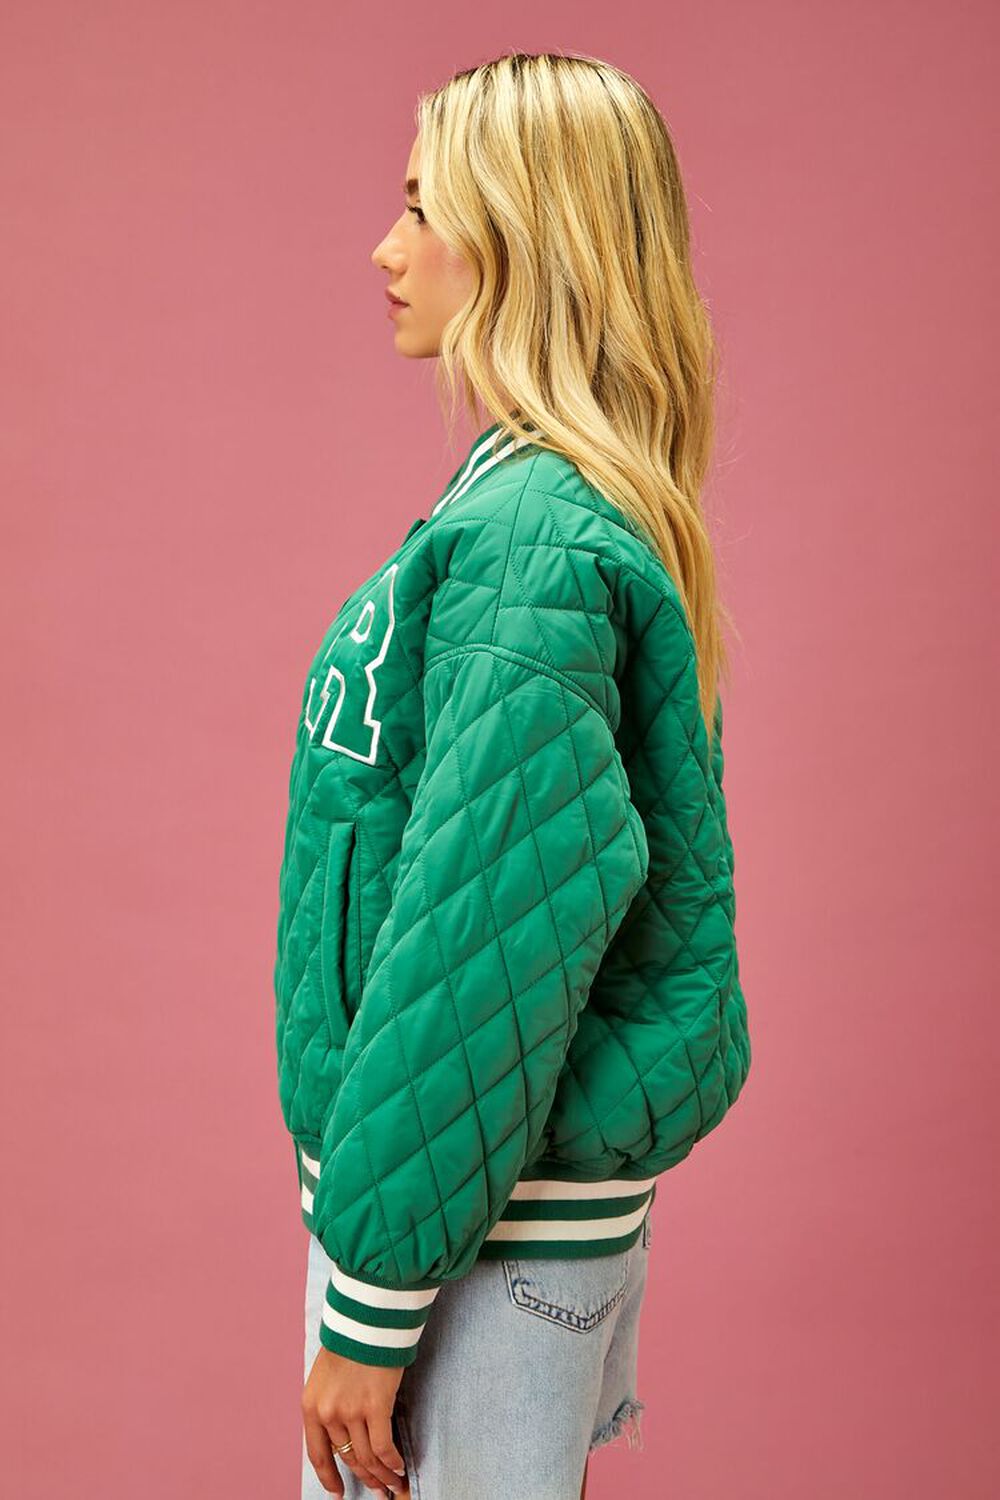 Forever 21 Women's Quilted Reebok Varsity Jacket in Green Large | F21